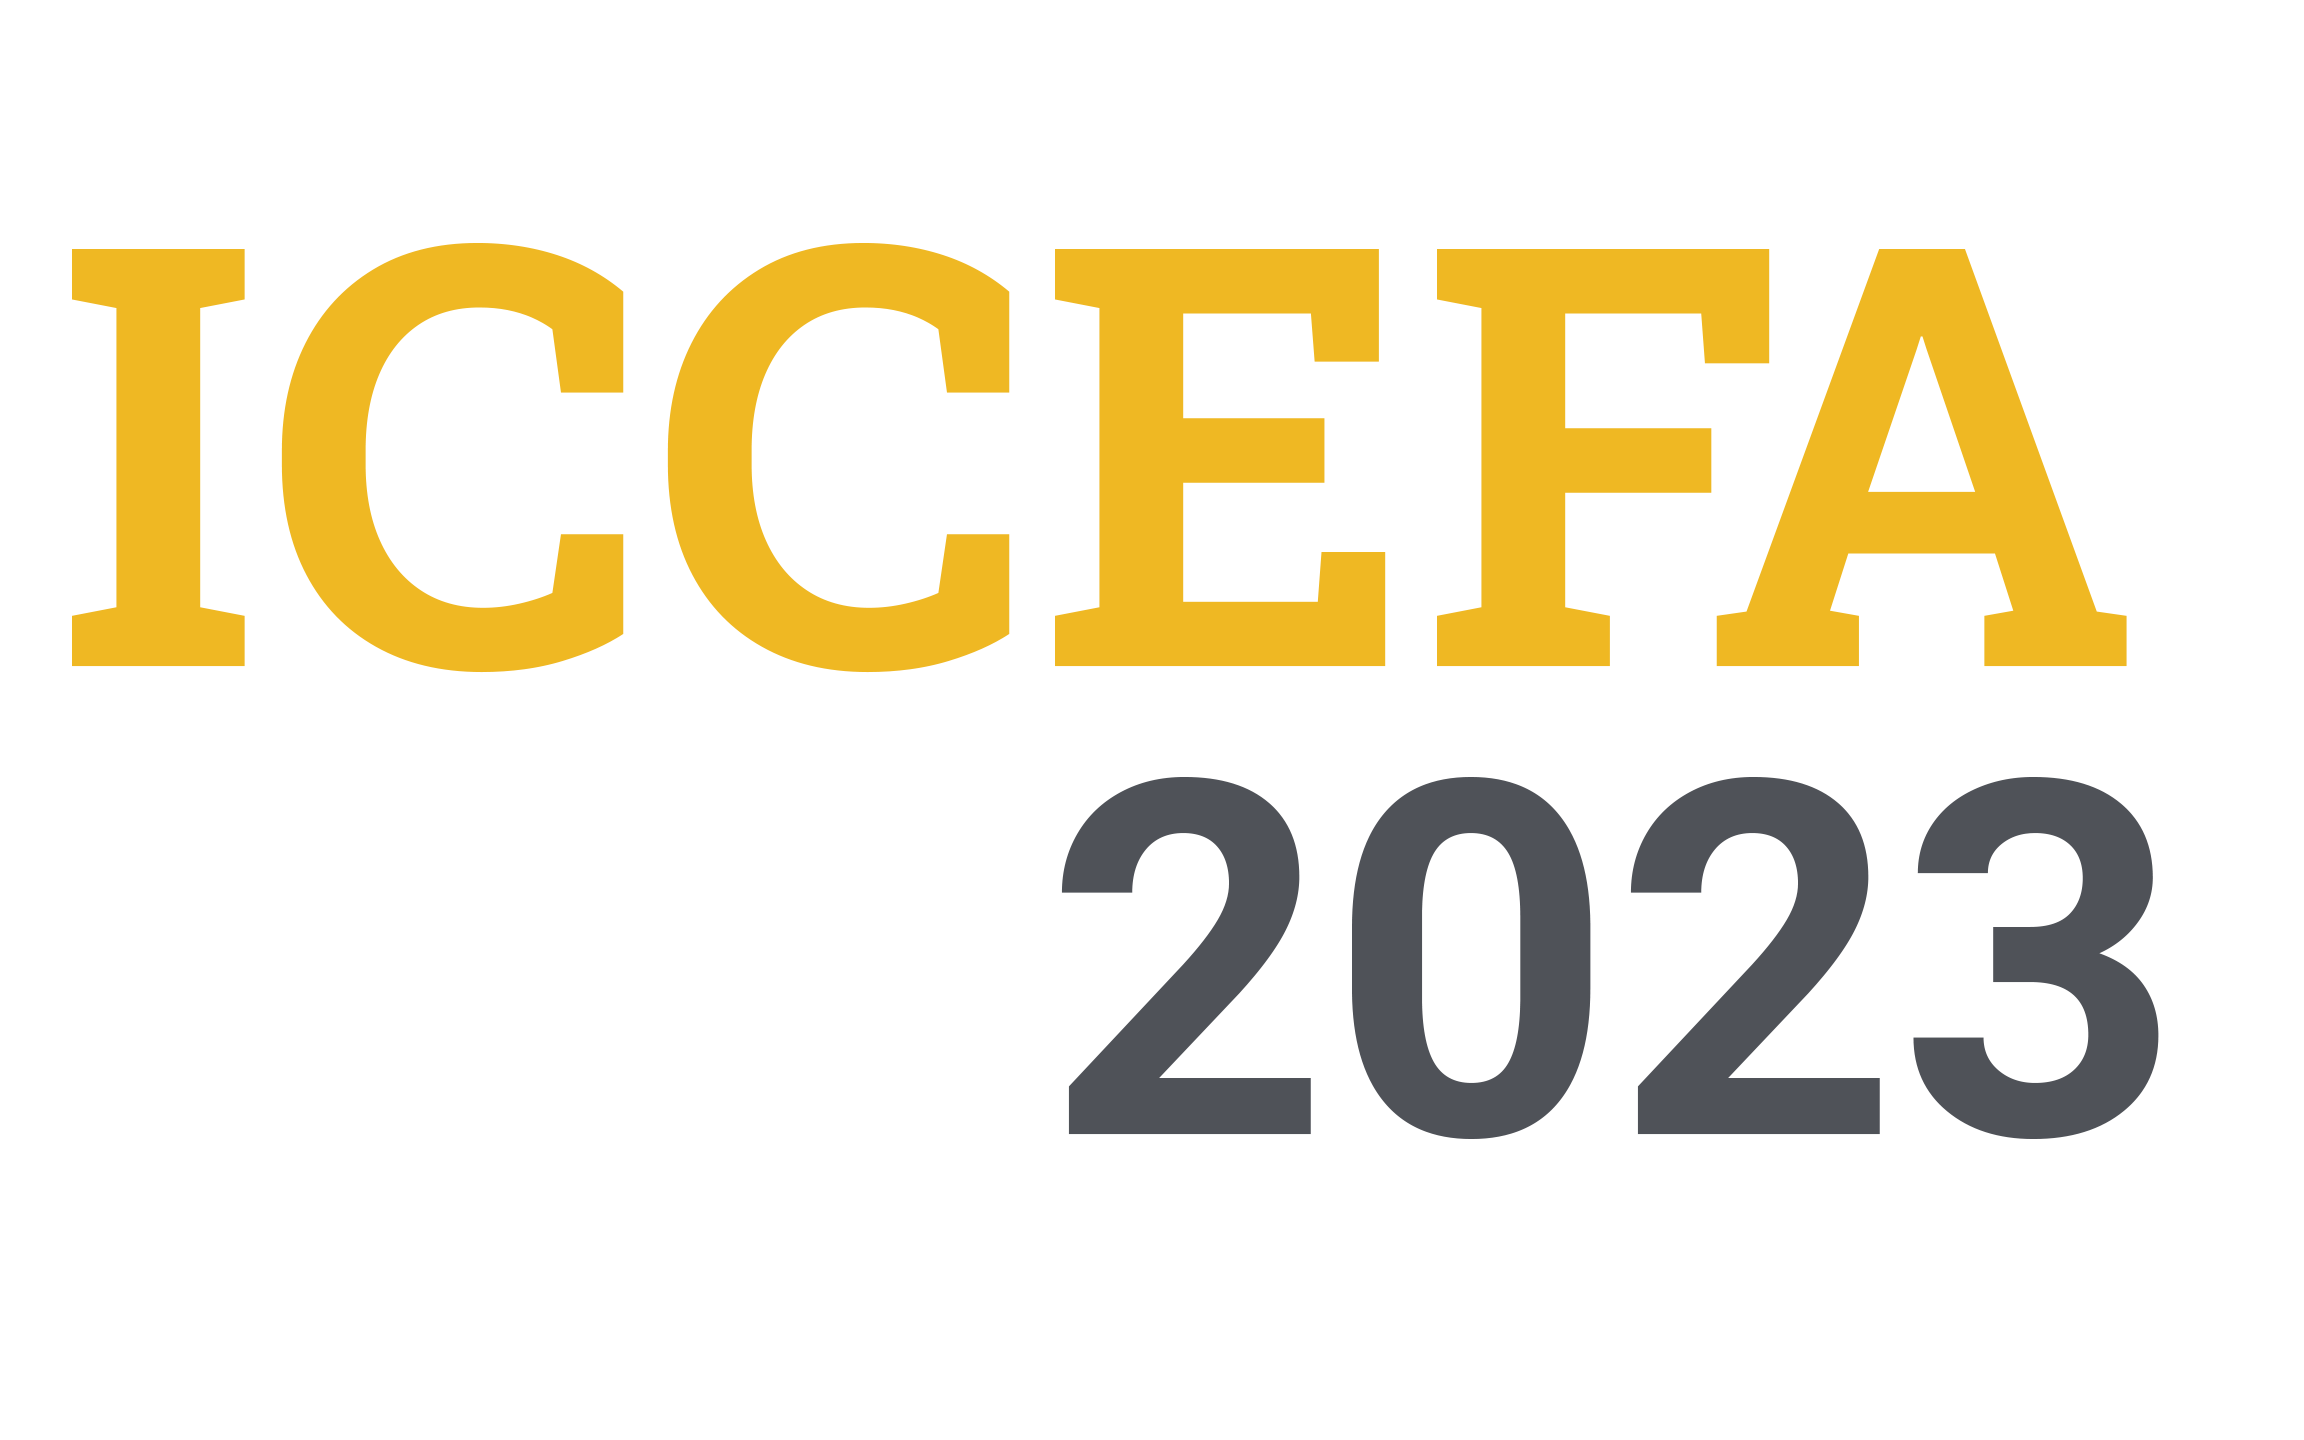 ICCEFA Conference